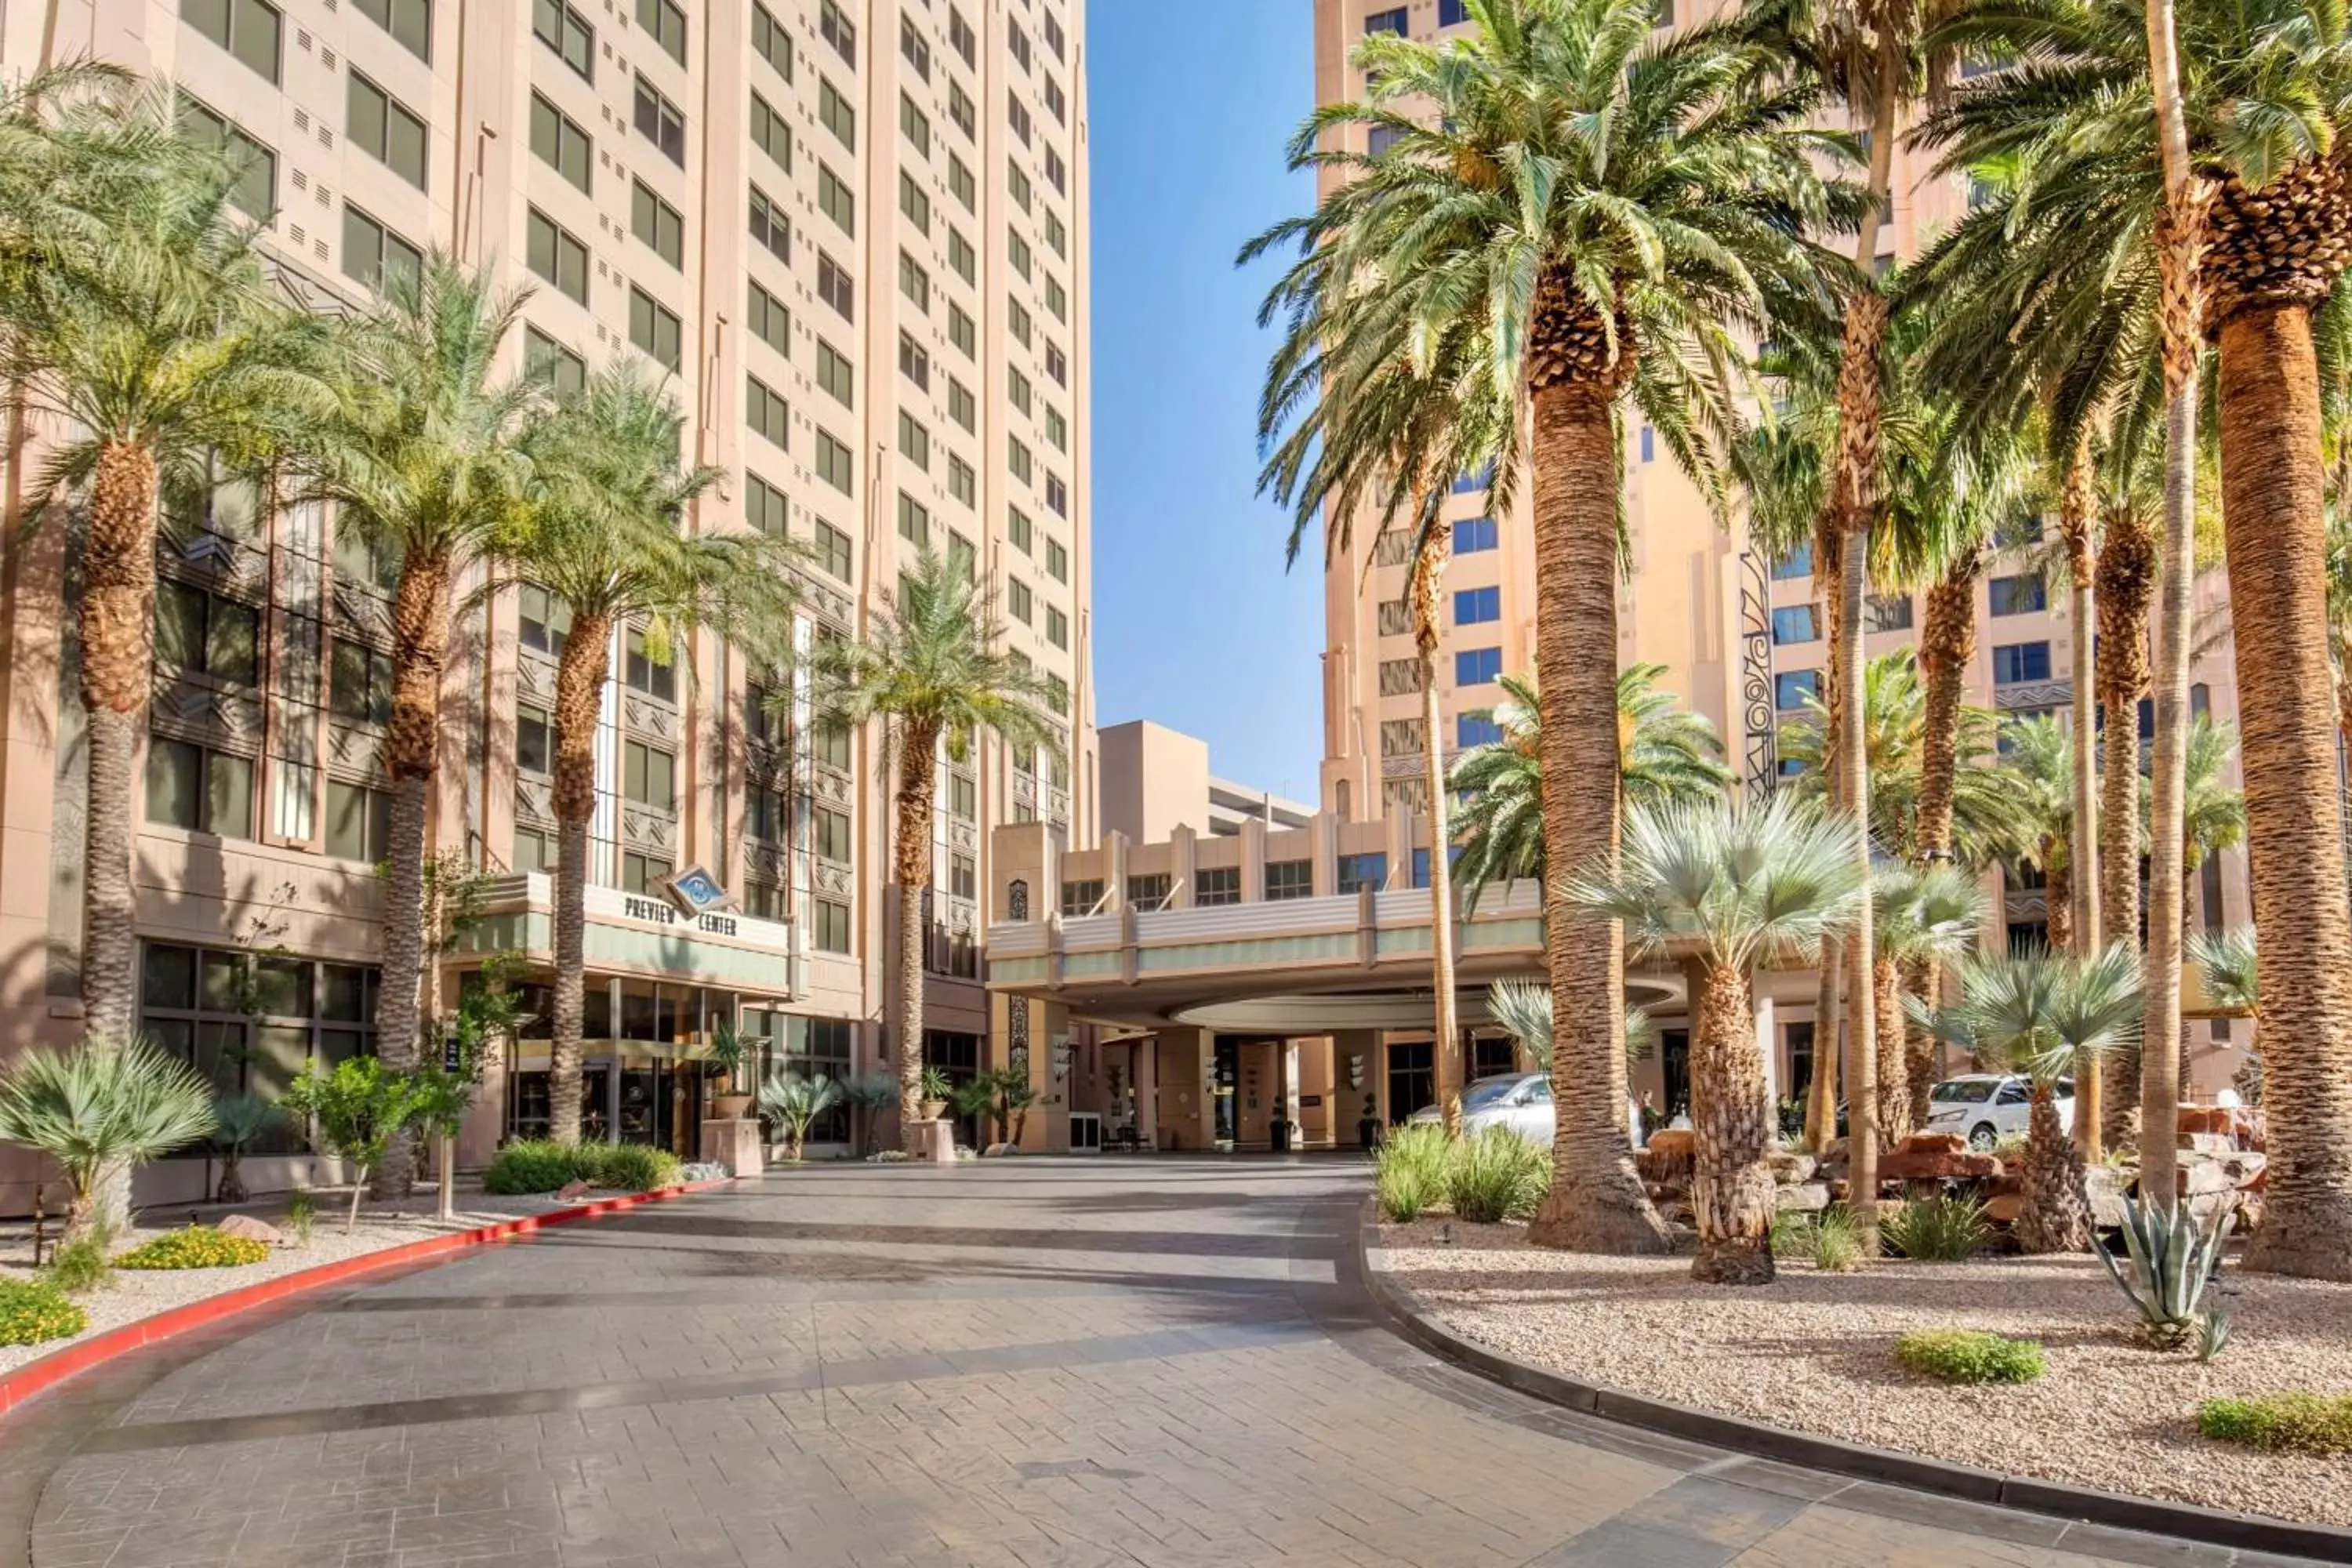 Property Building in Hilton Grand Vacations Club on the Las Vegas Strip